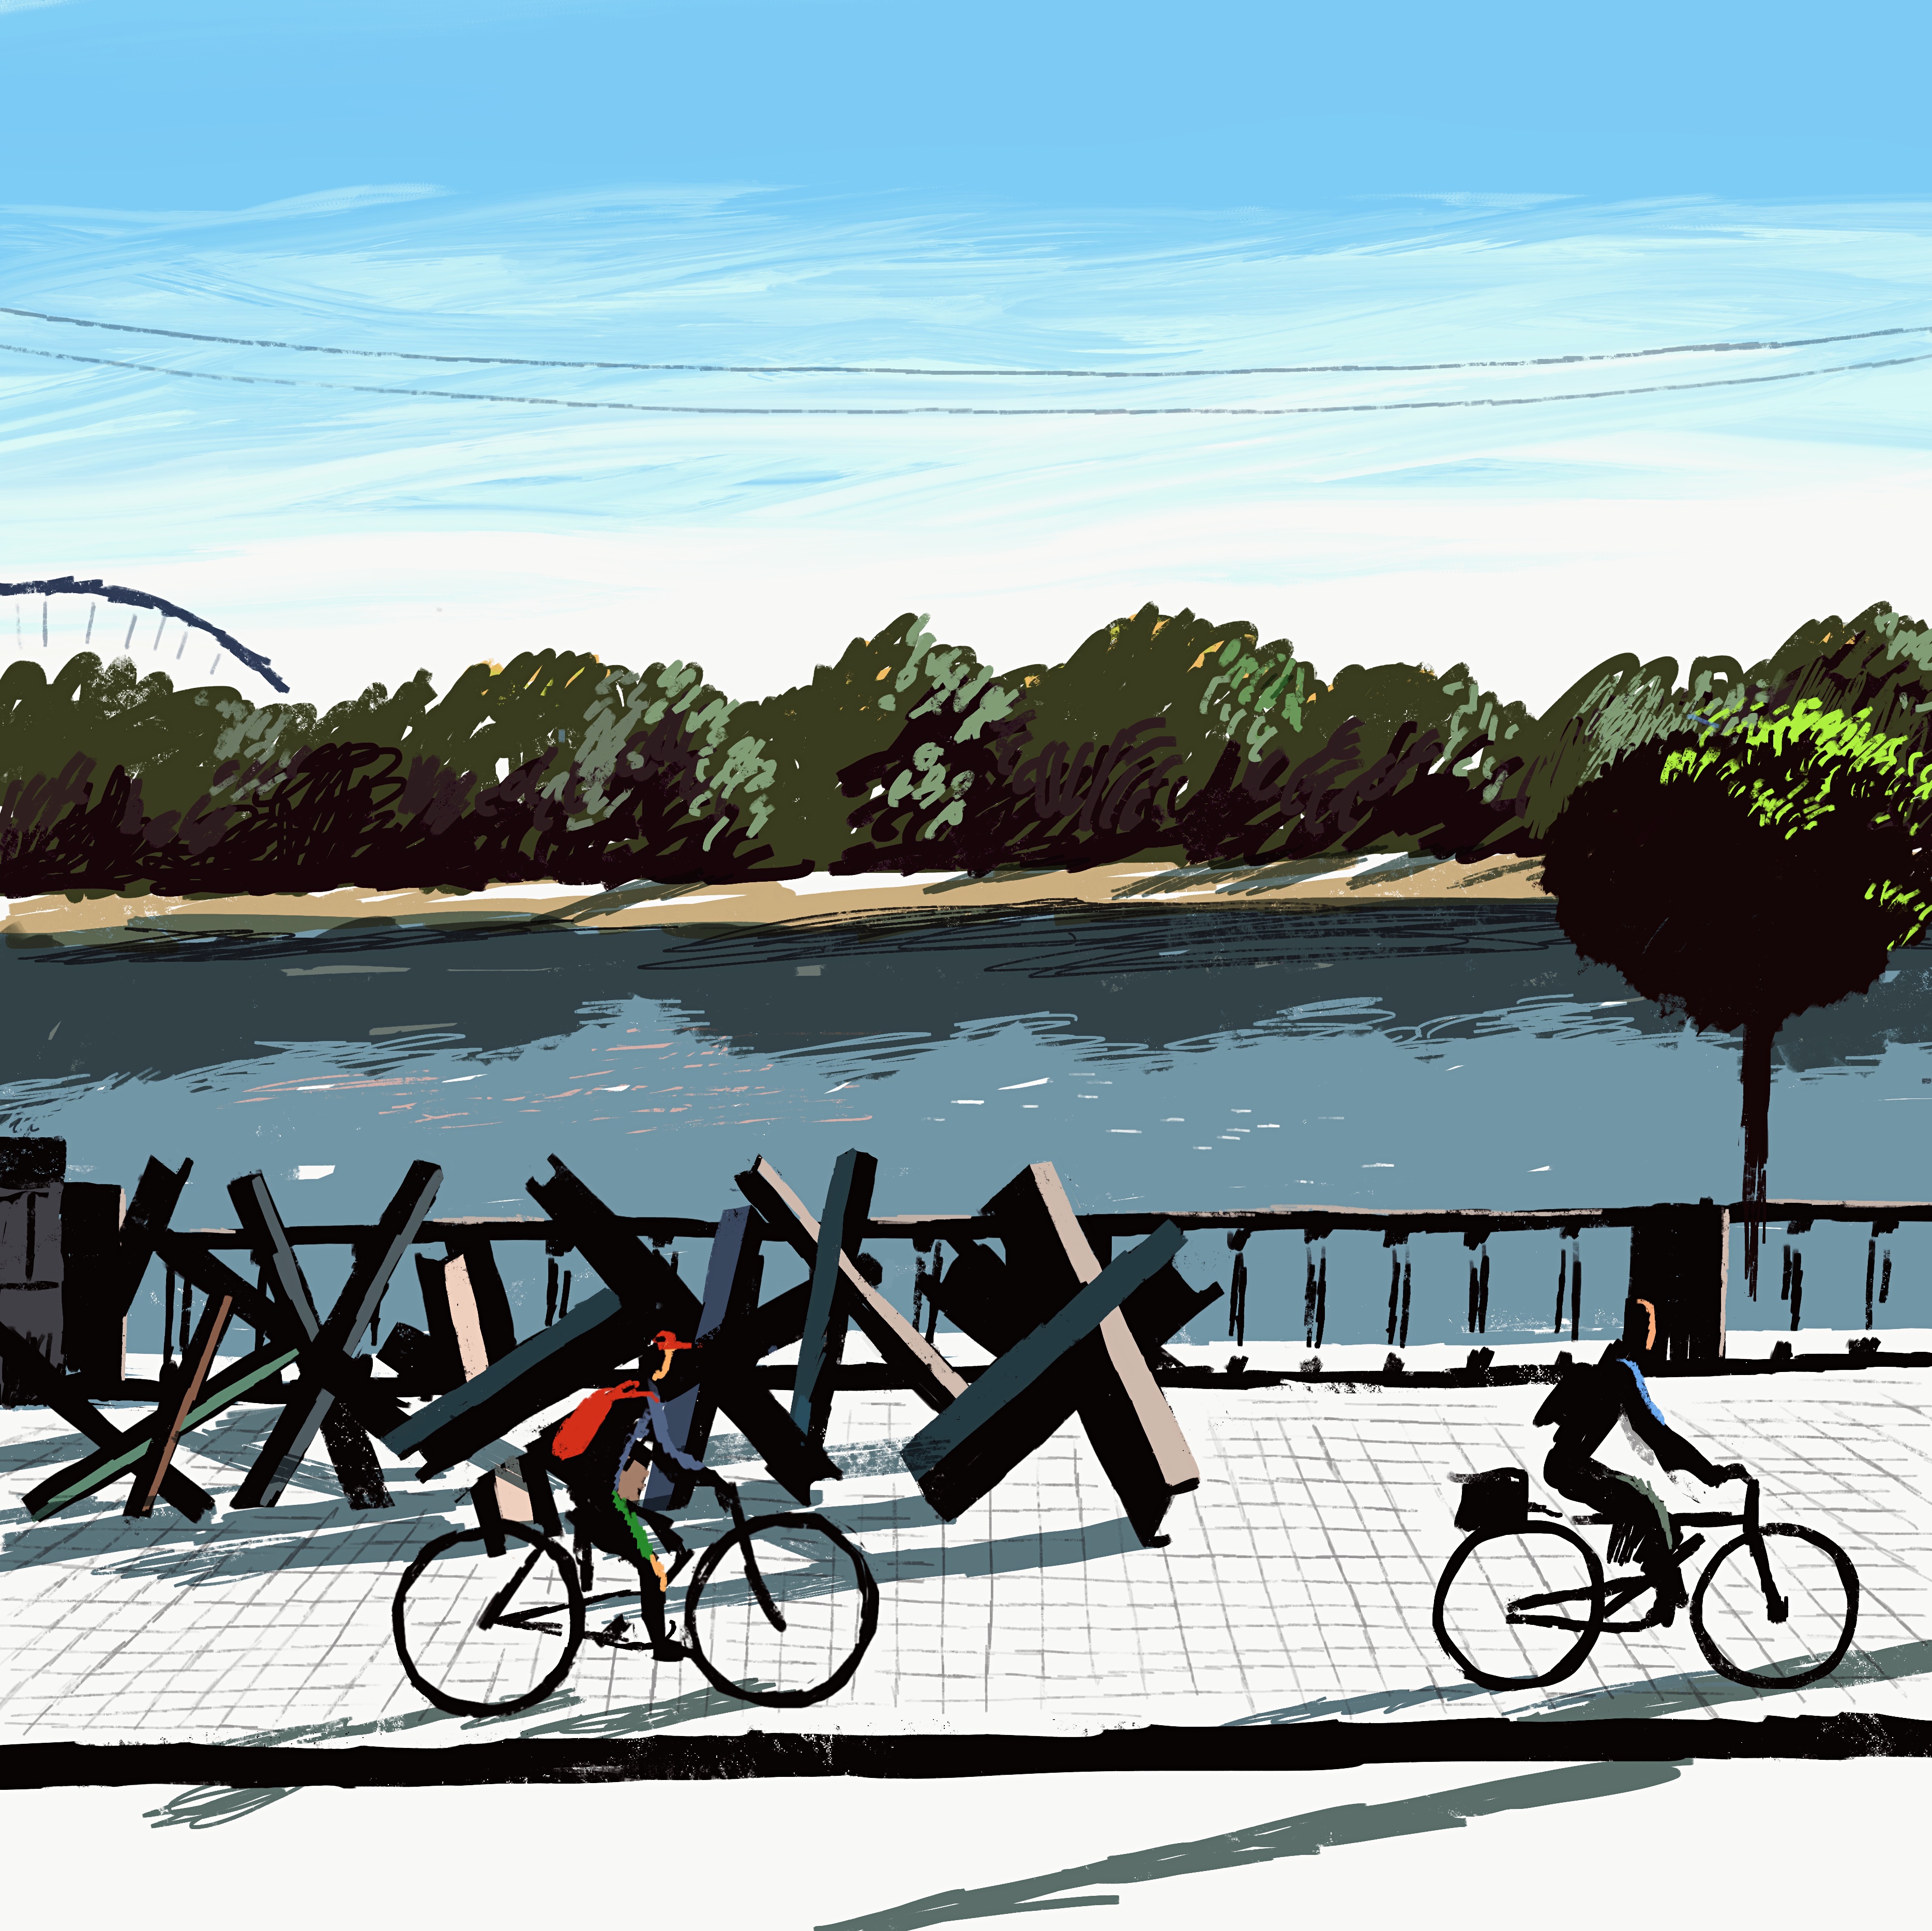 A digital rendering of two people riding bicycles past anti-tank obstacles beside a river in Ukraine. The day is sunny and green trees stand across the riverbank.